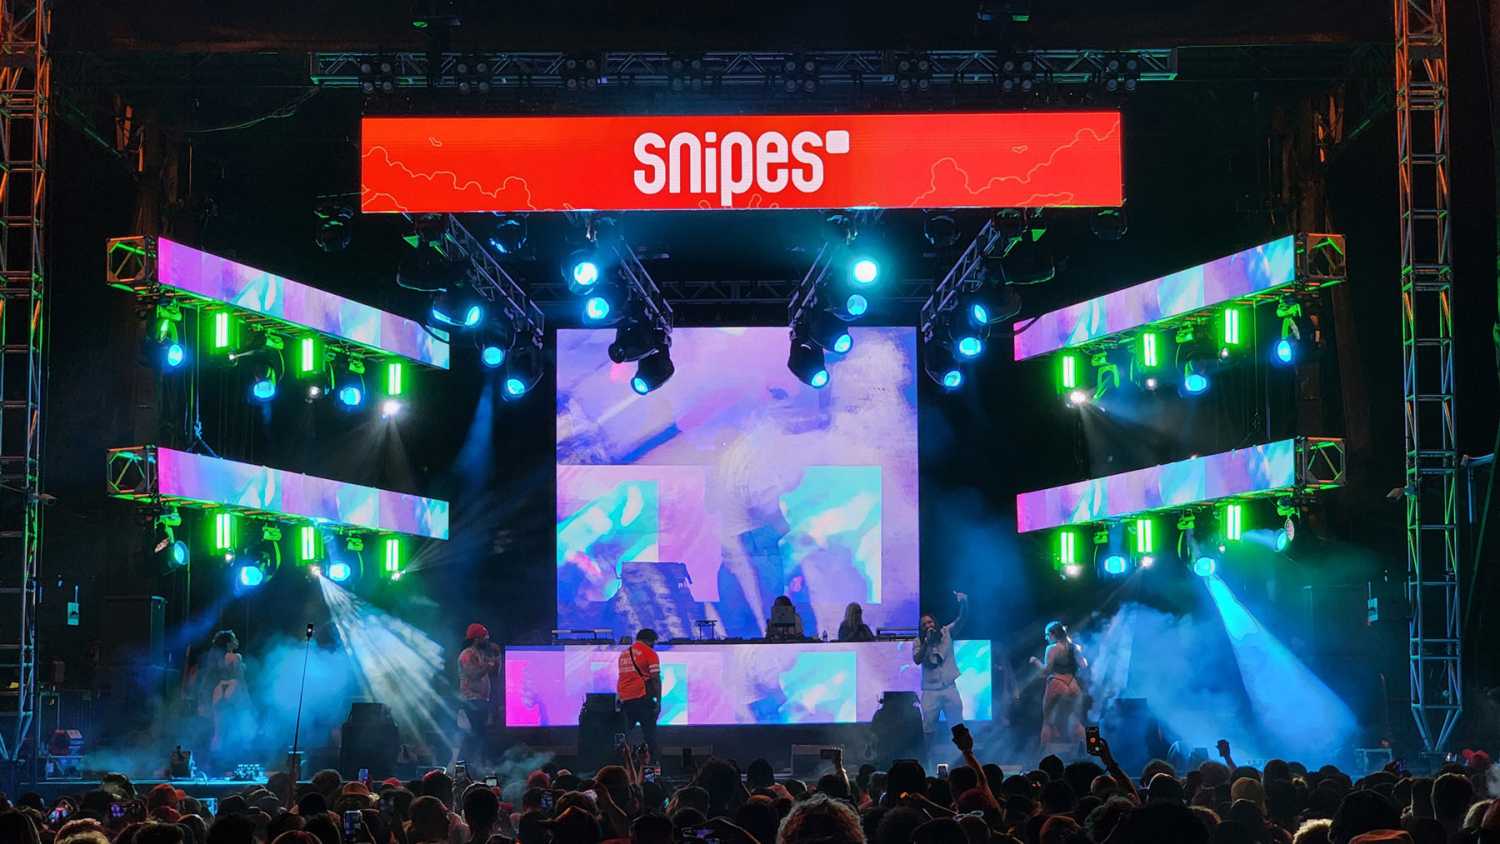 Rolling Loud’s high-profile Snipes Stage